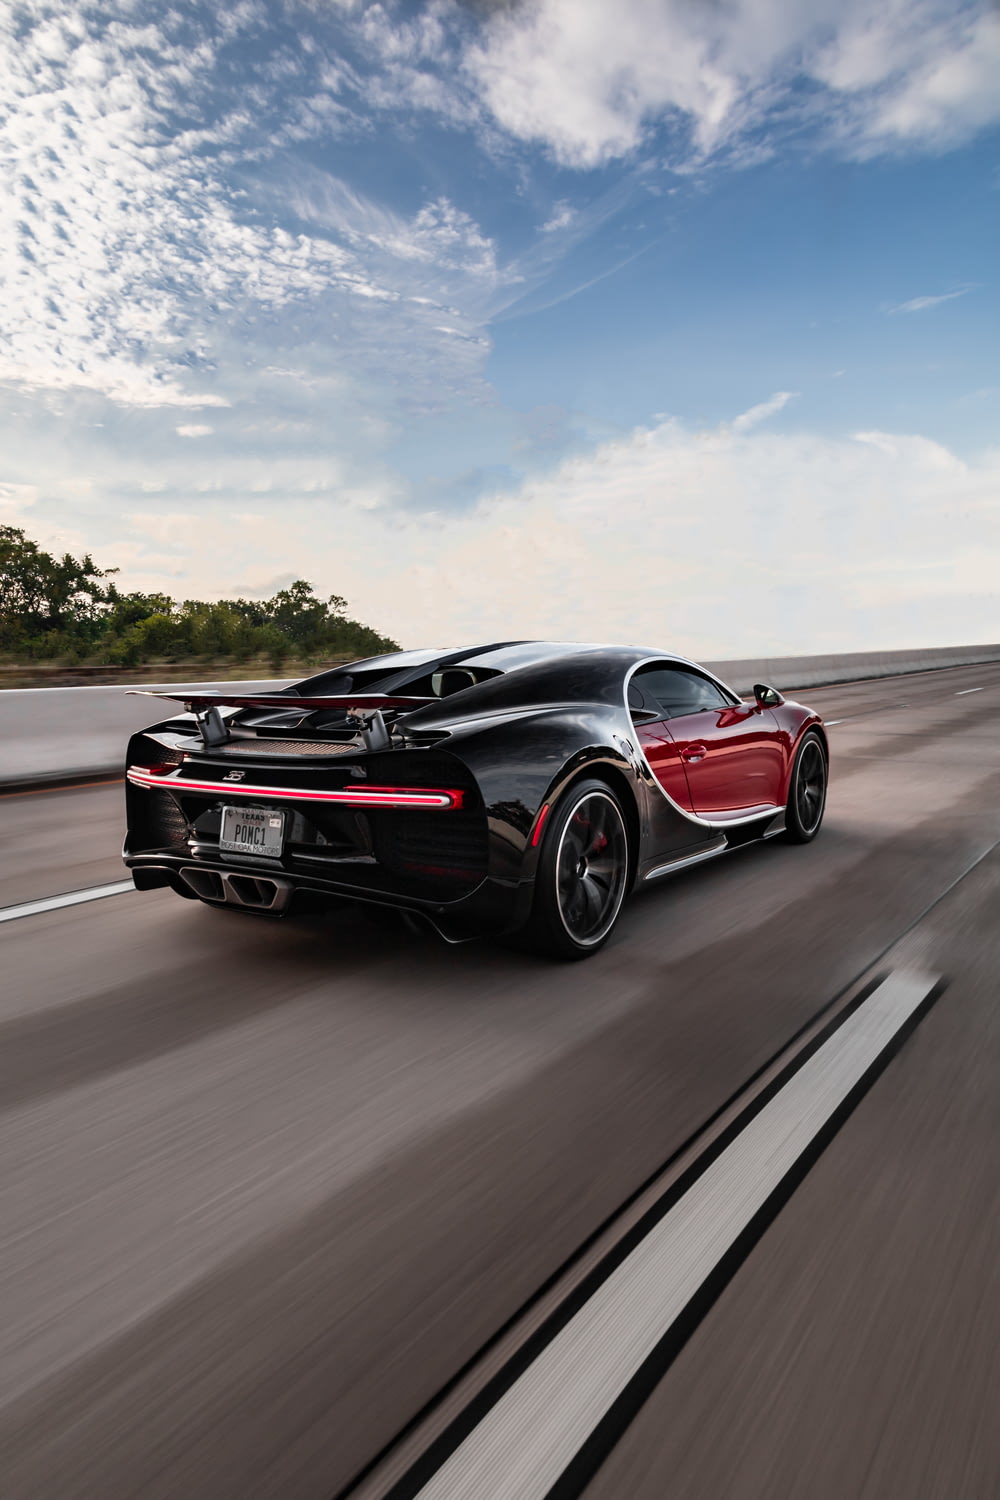 a black and red sports car driving down the road